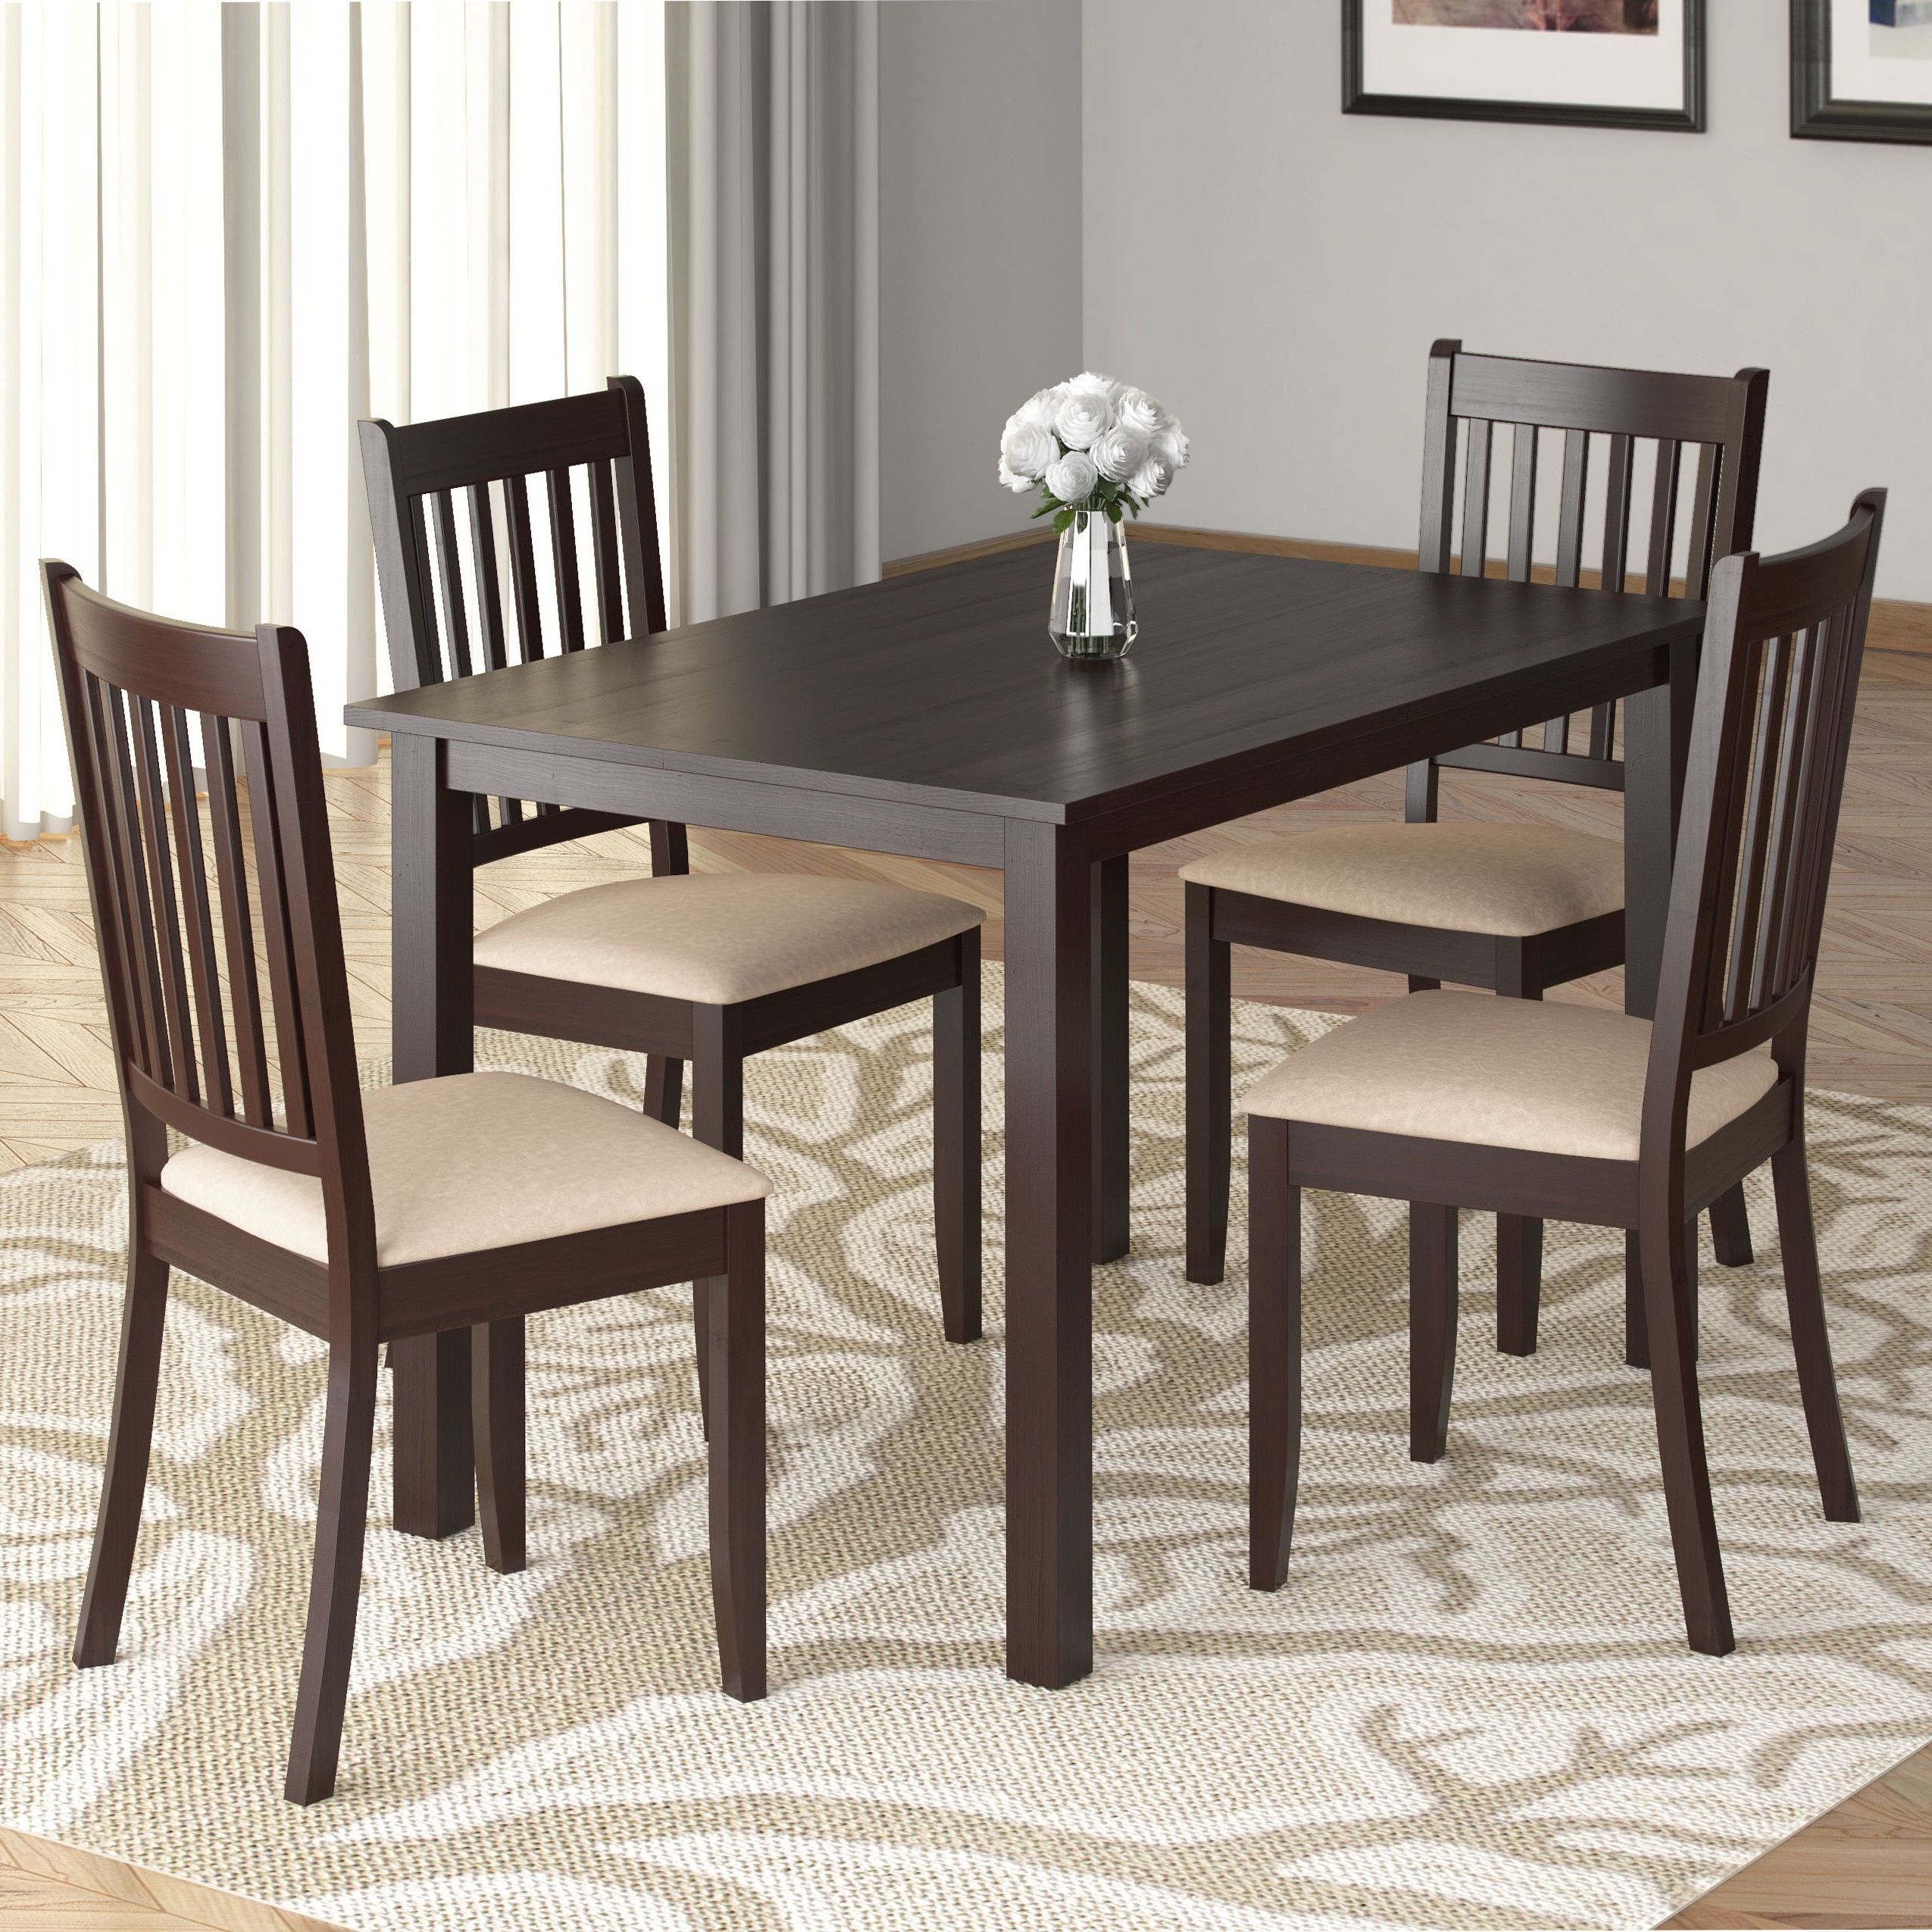 30 Ideas Of Atwood Transitional Rectangular Dining Tables